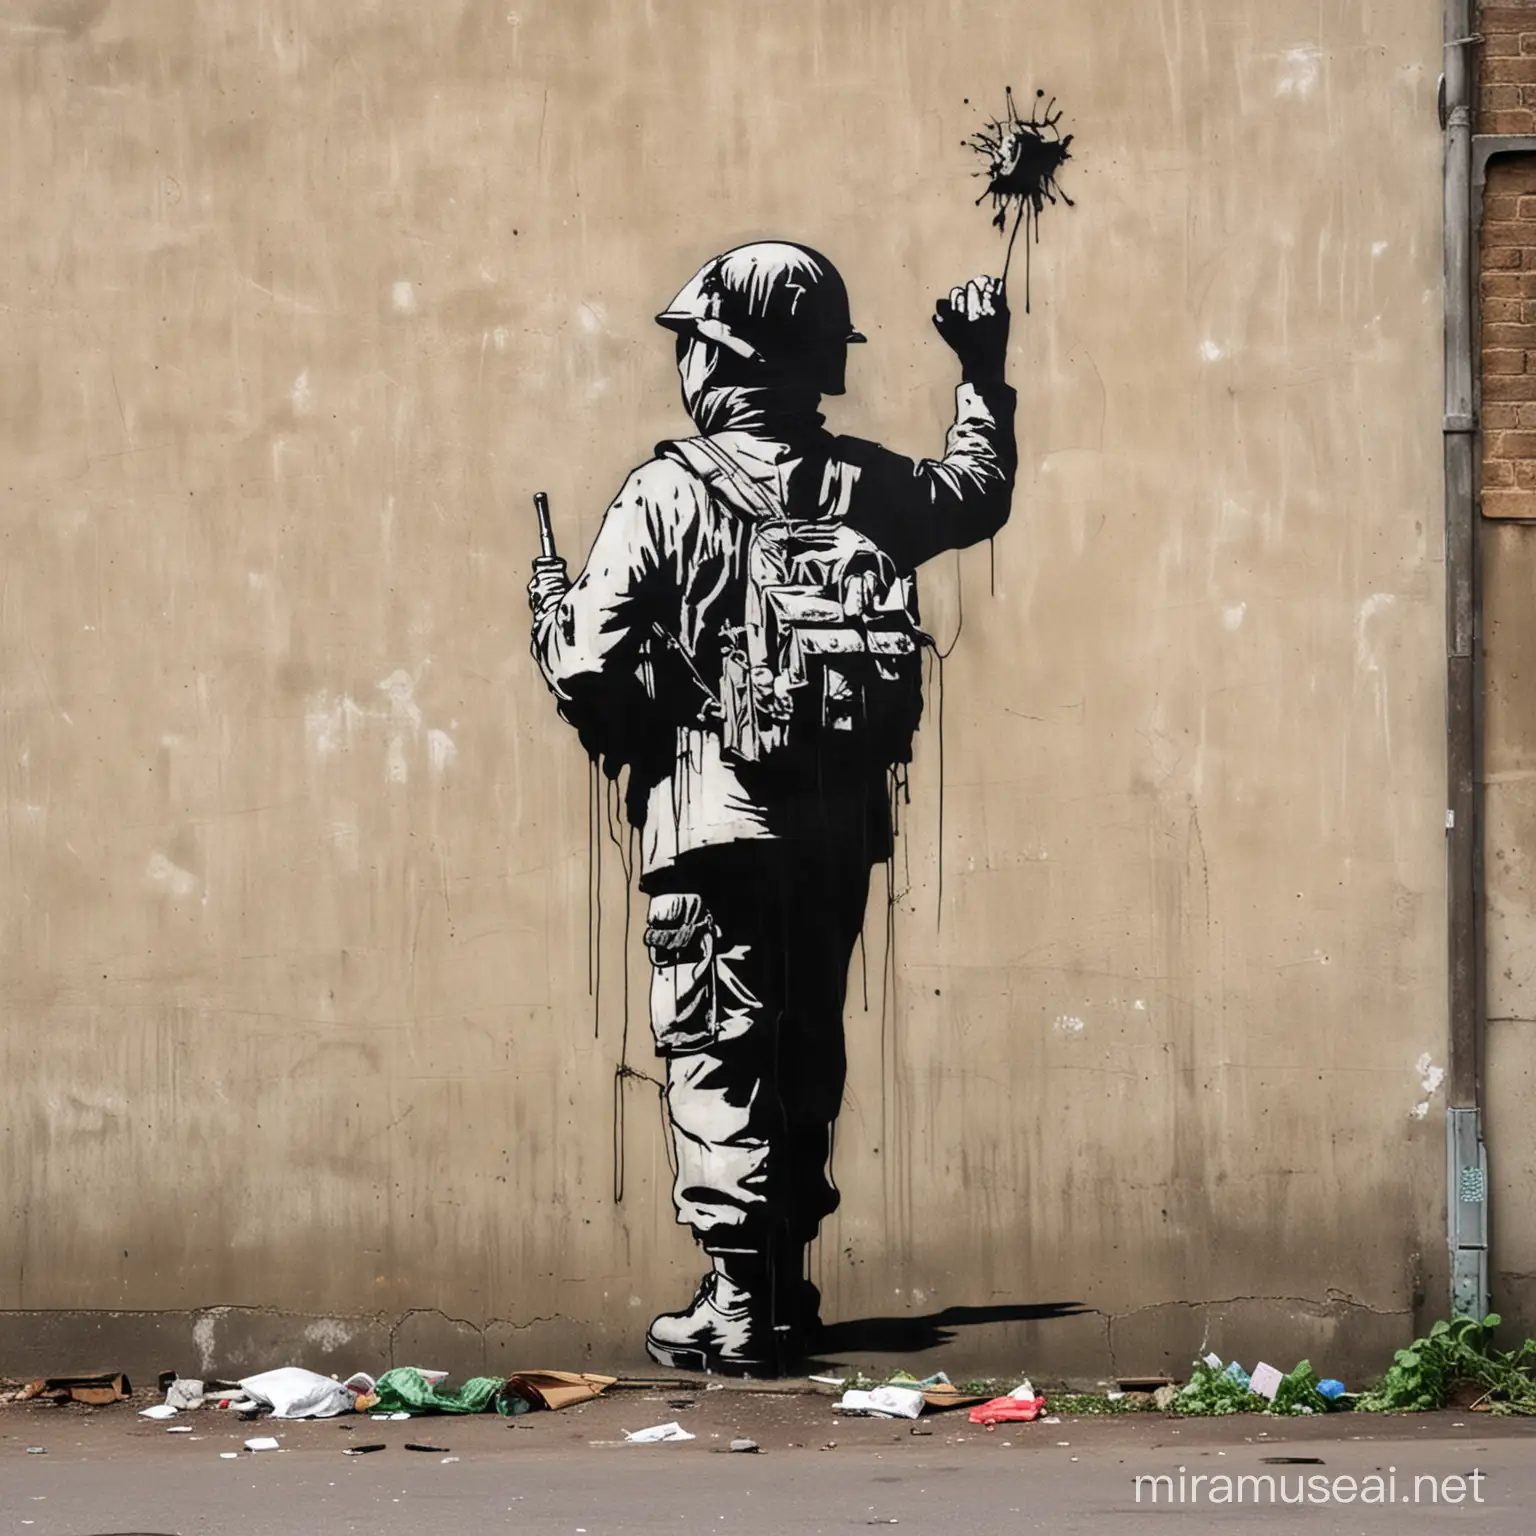 Banksystyle Graffiti Reflecting Global Conflict and Current Affairs